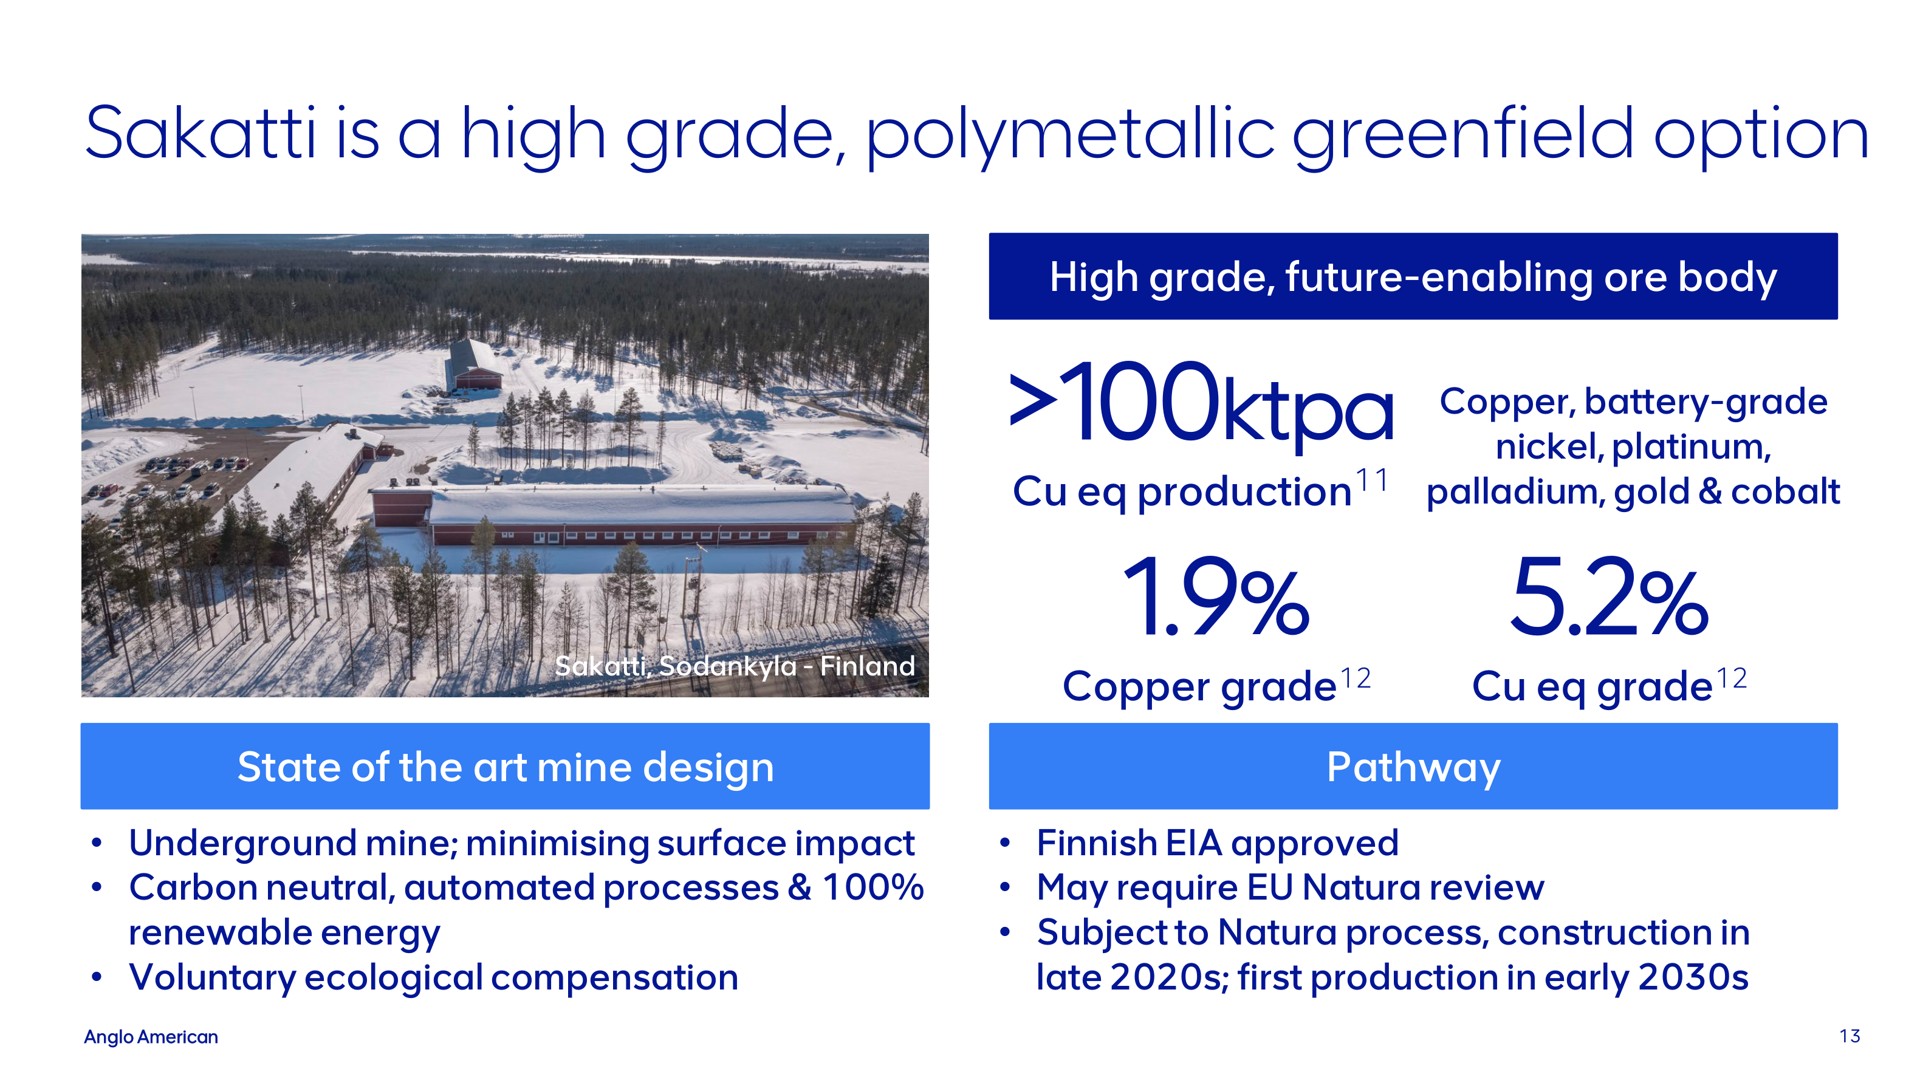 is a high grade option | AngloAmerican